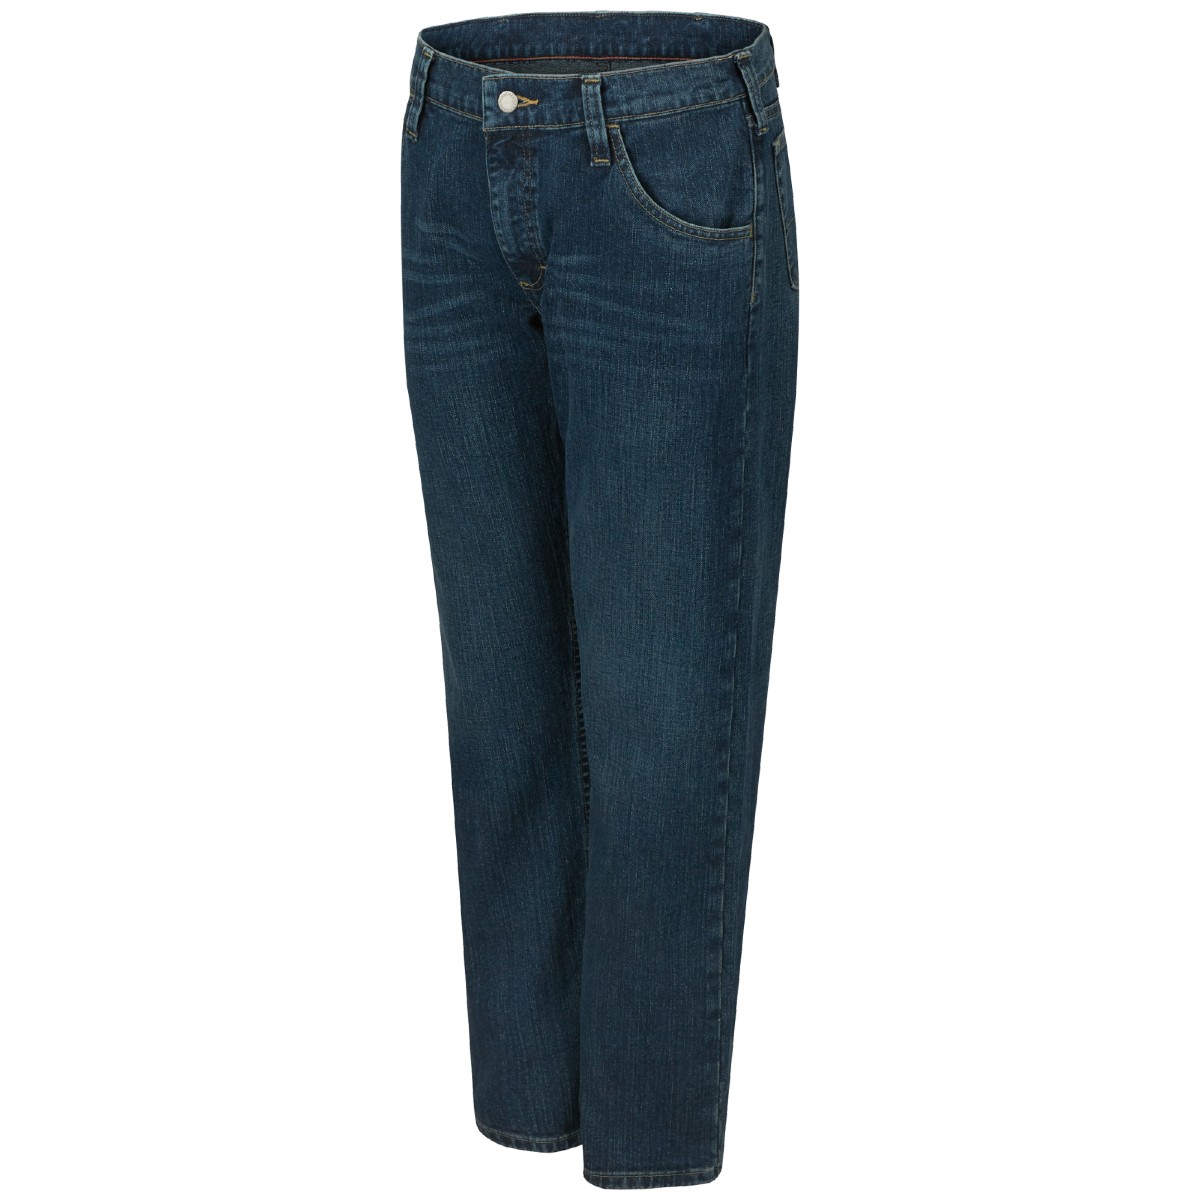 Bulwark Men’s Straight Fit Jean with Stretch